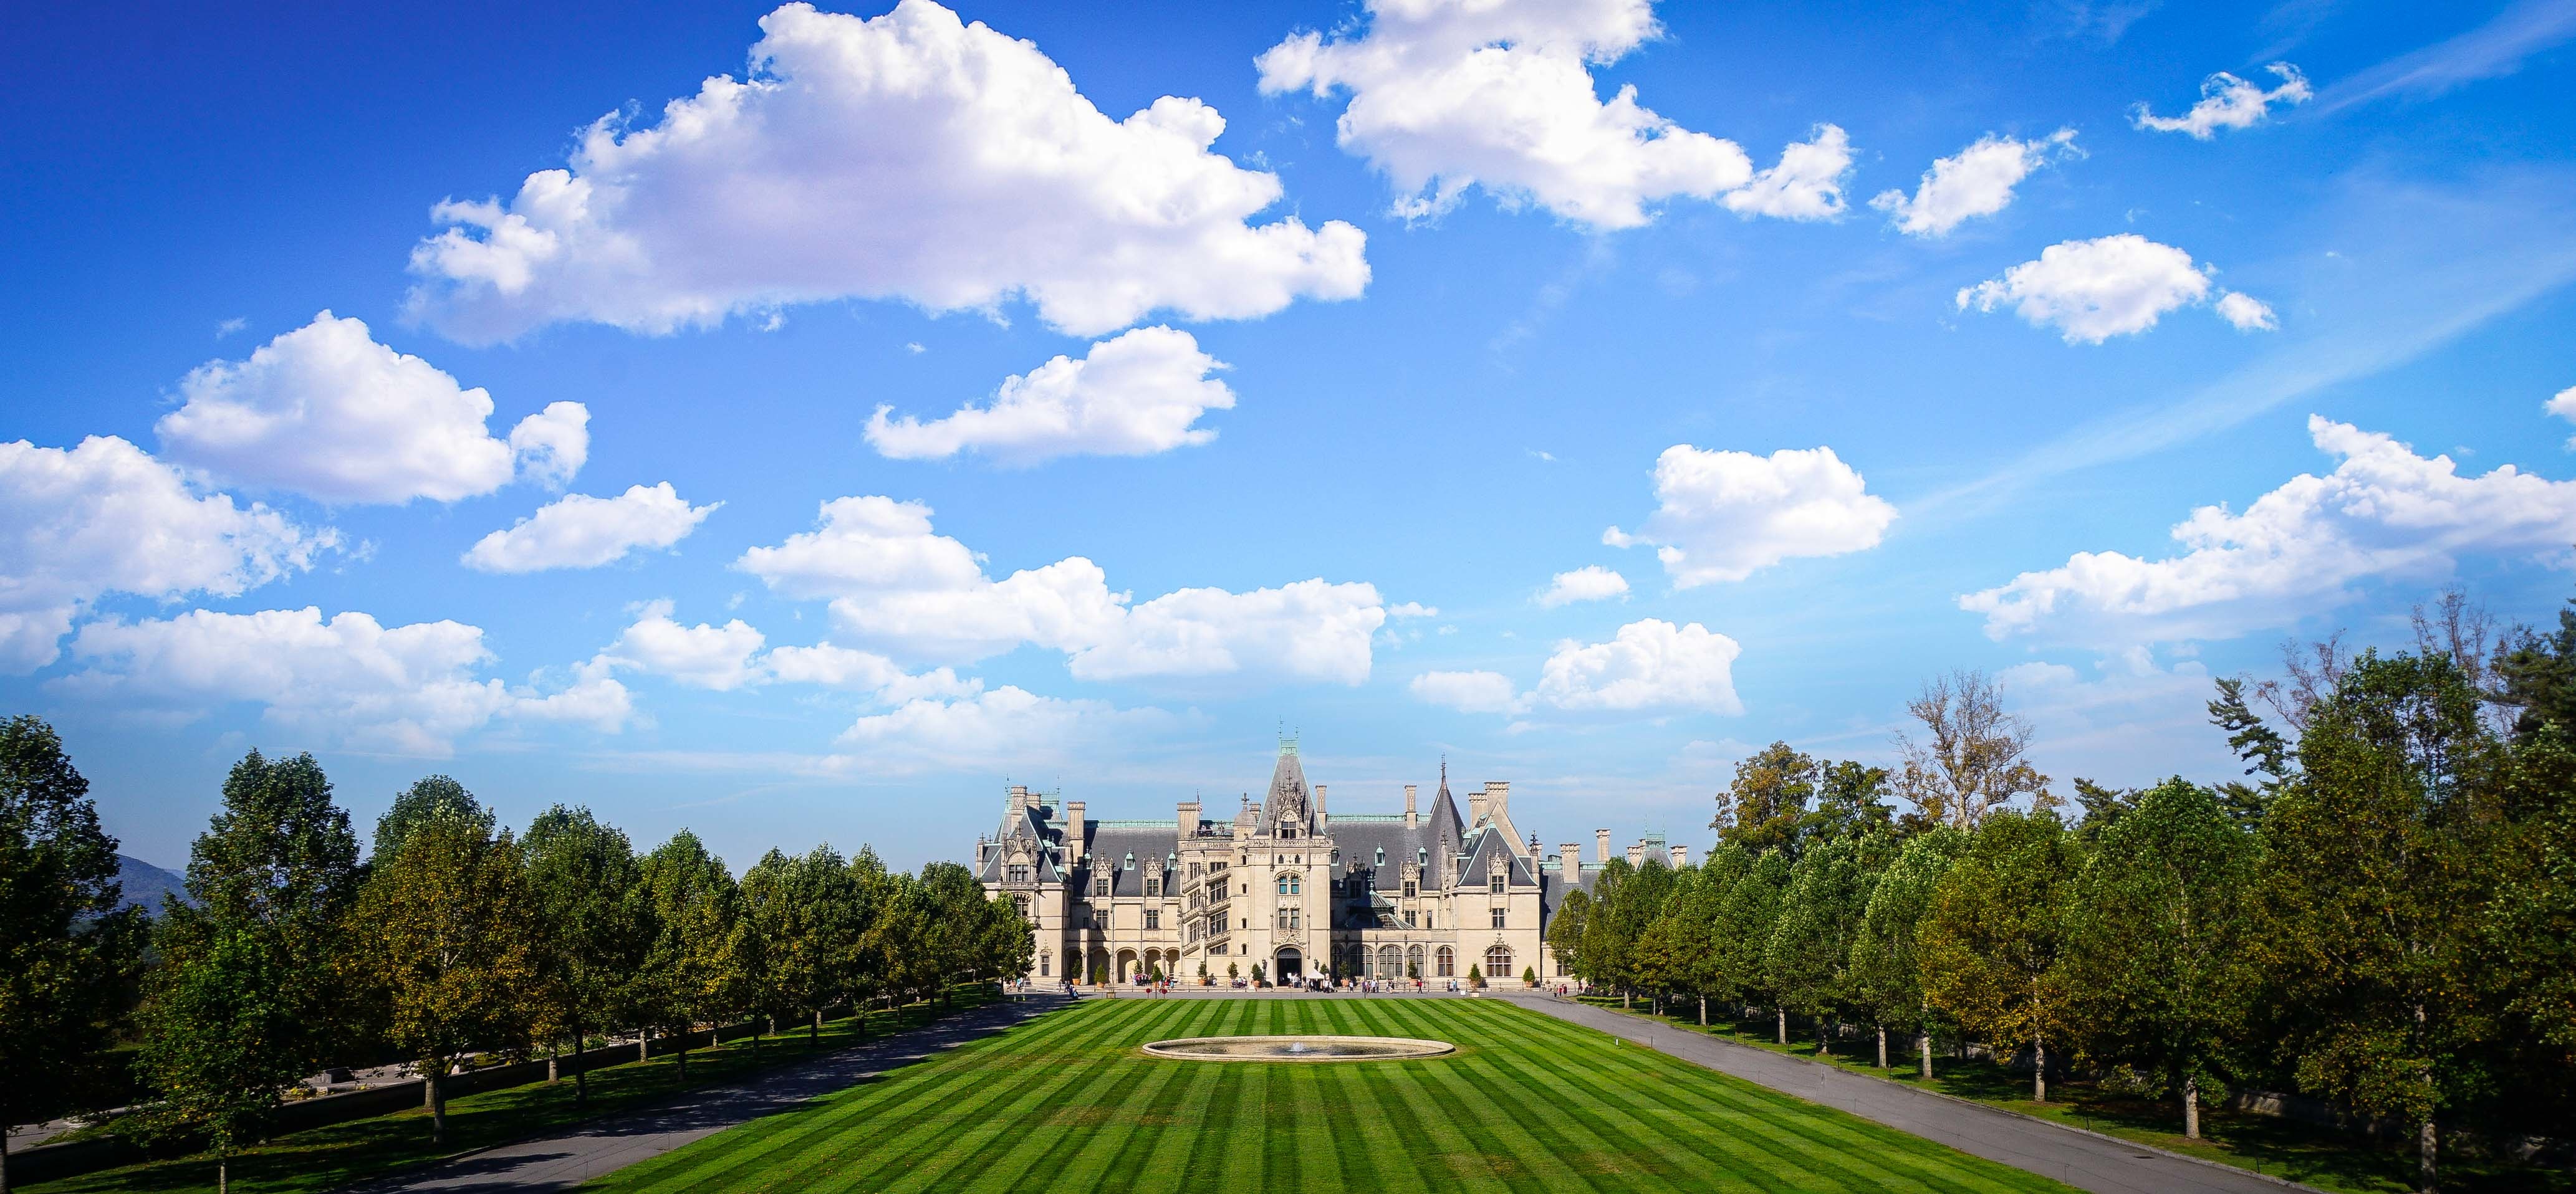 The Biltmore Estate under a partially cloudy sky